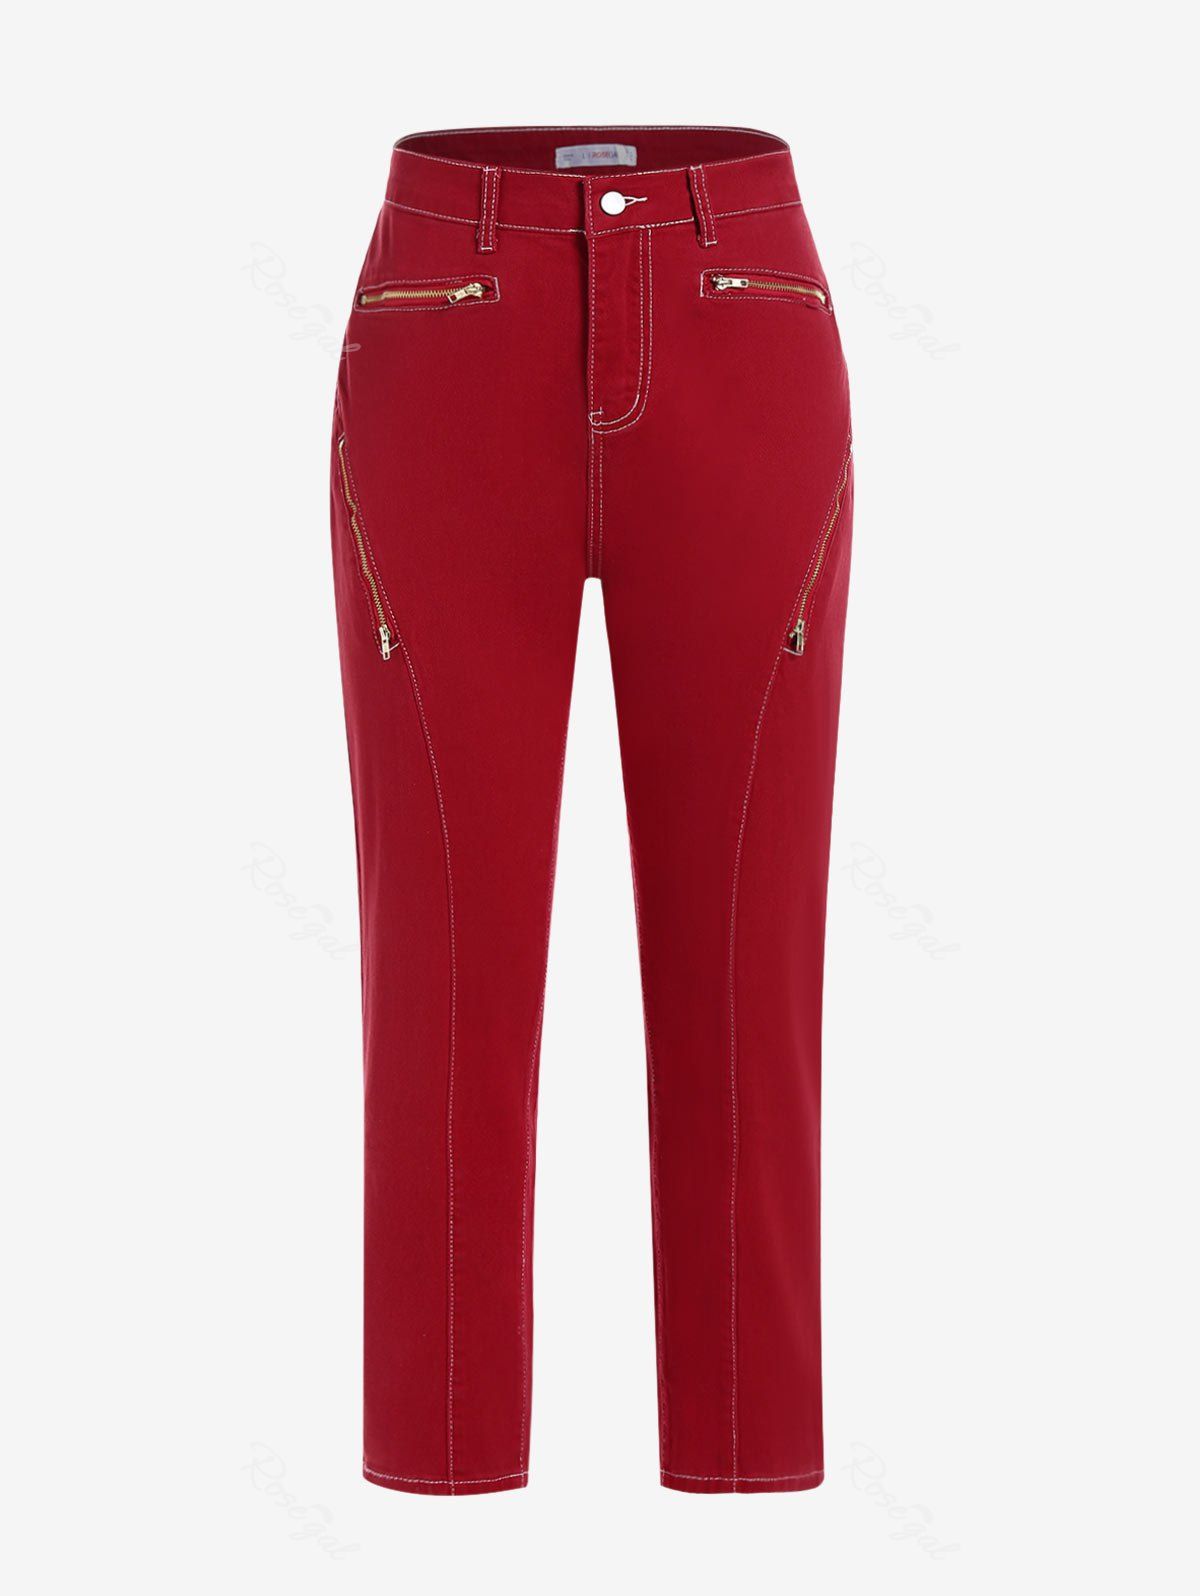 Buy Topstitching Zippered Front Plus Size Colored Jeans  